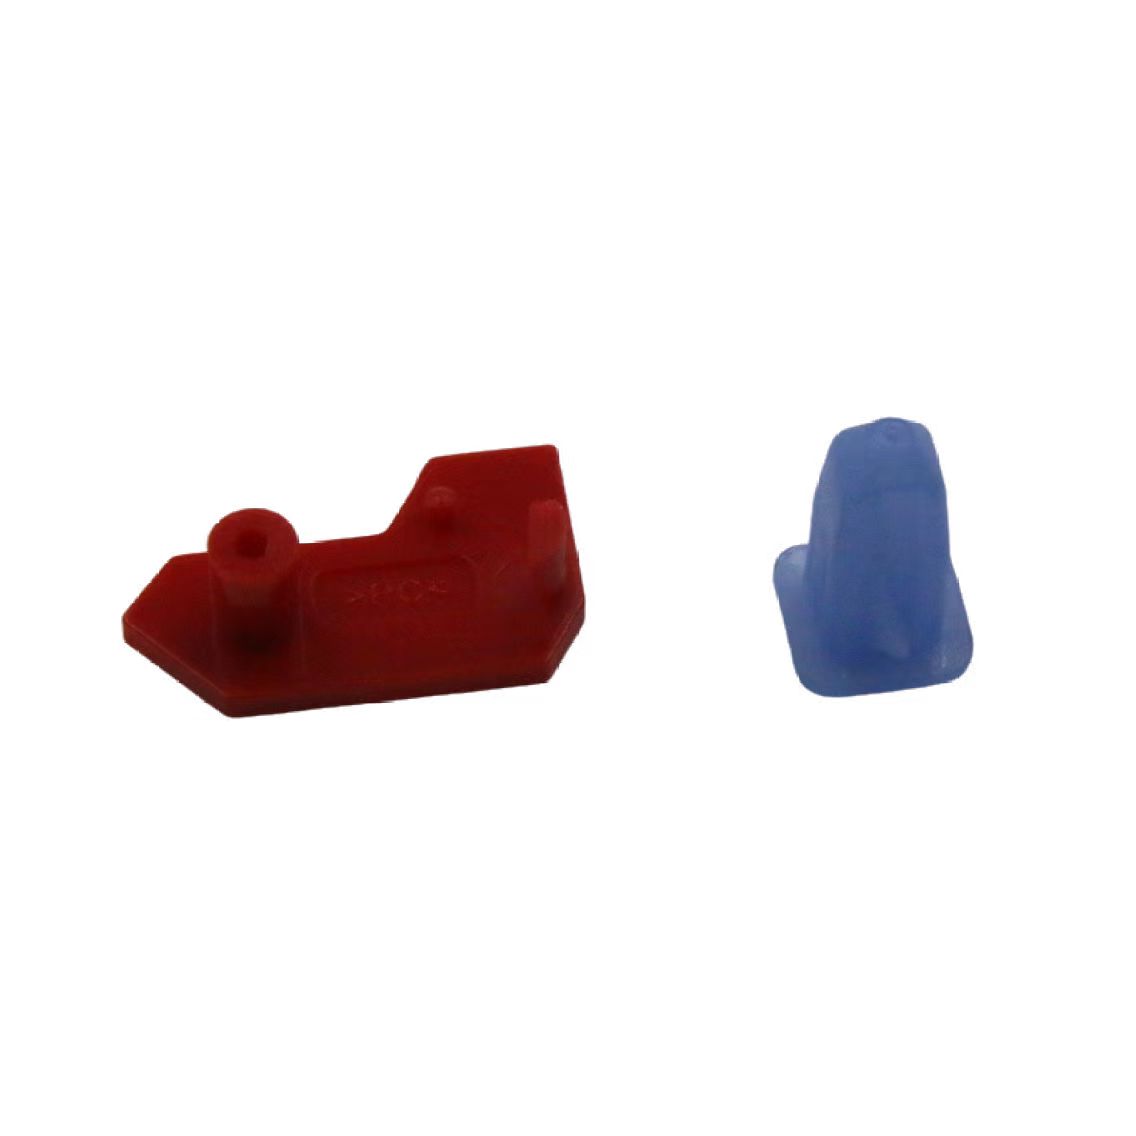 How many types of plastic moulding are there? 